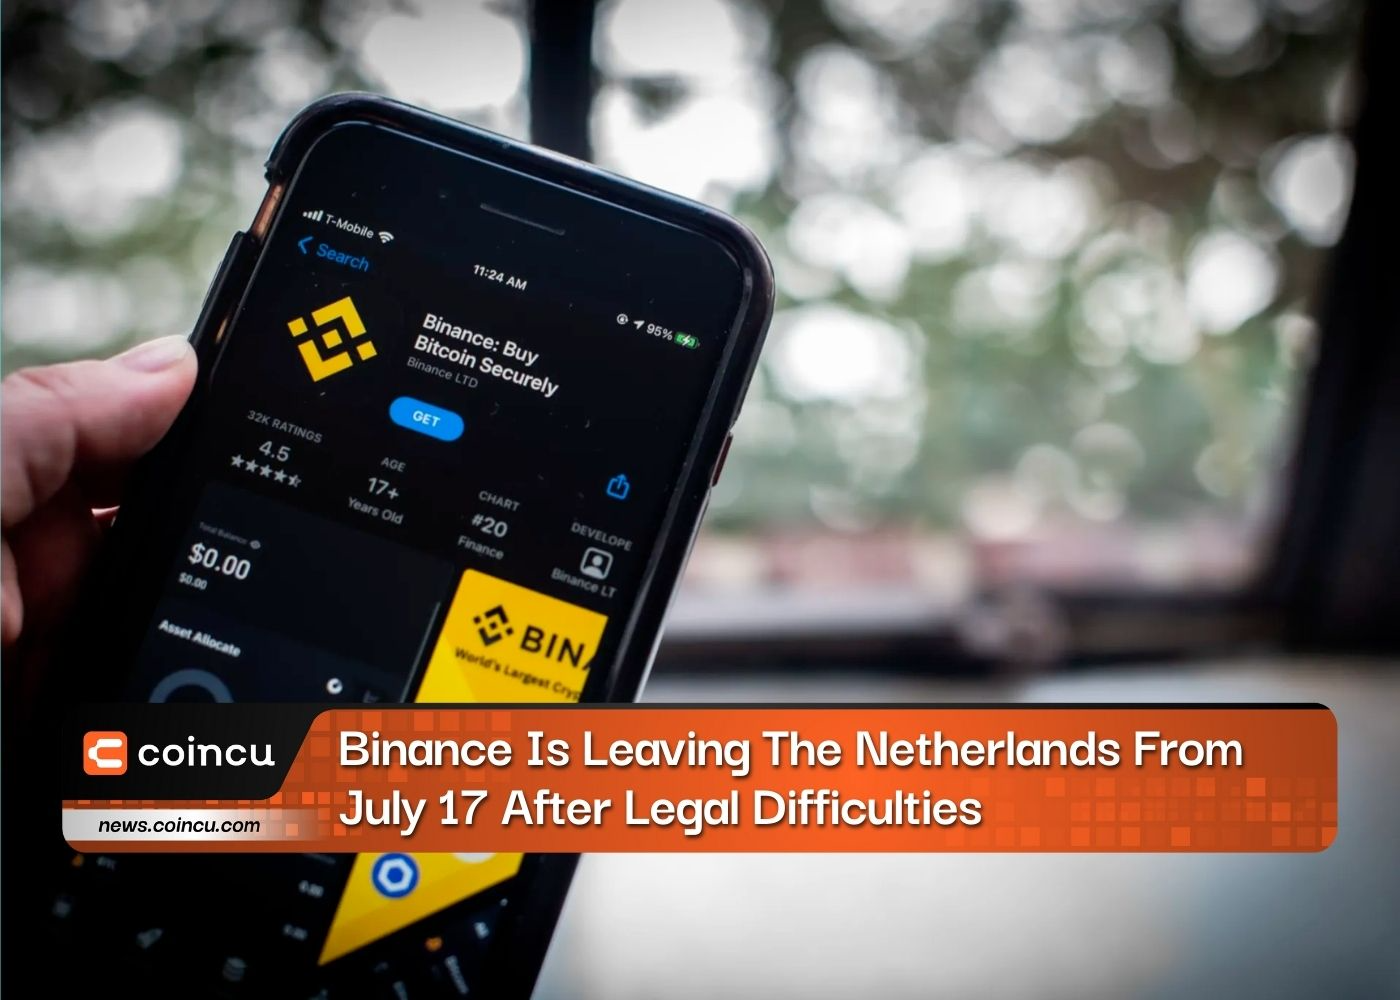 Binance Is Leaving The Netherlands From July 17 After Legal Difficulties